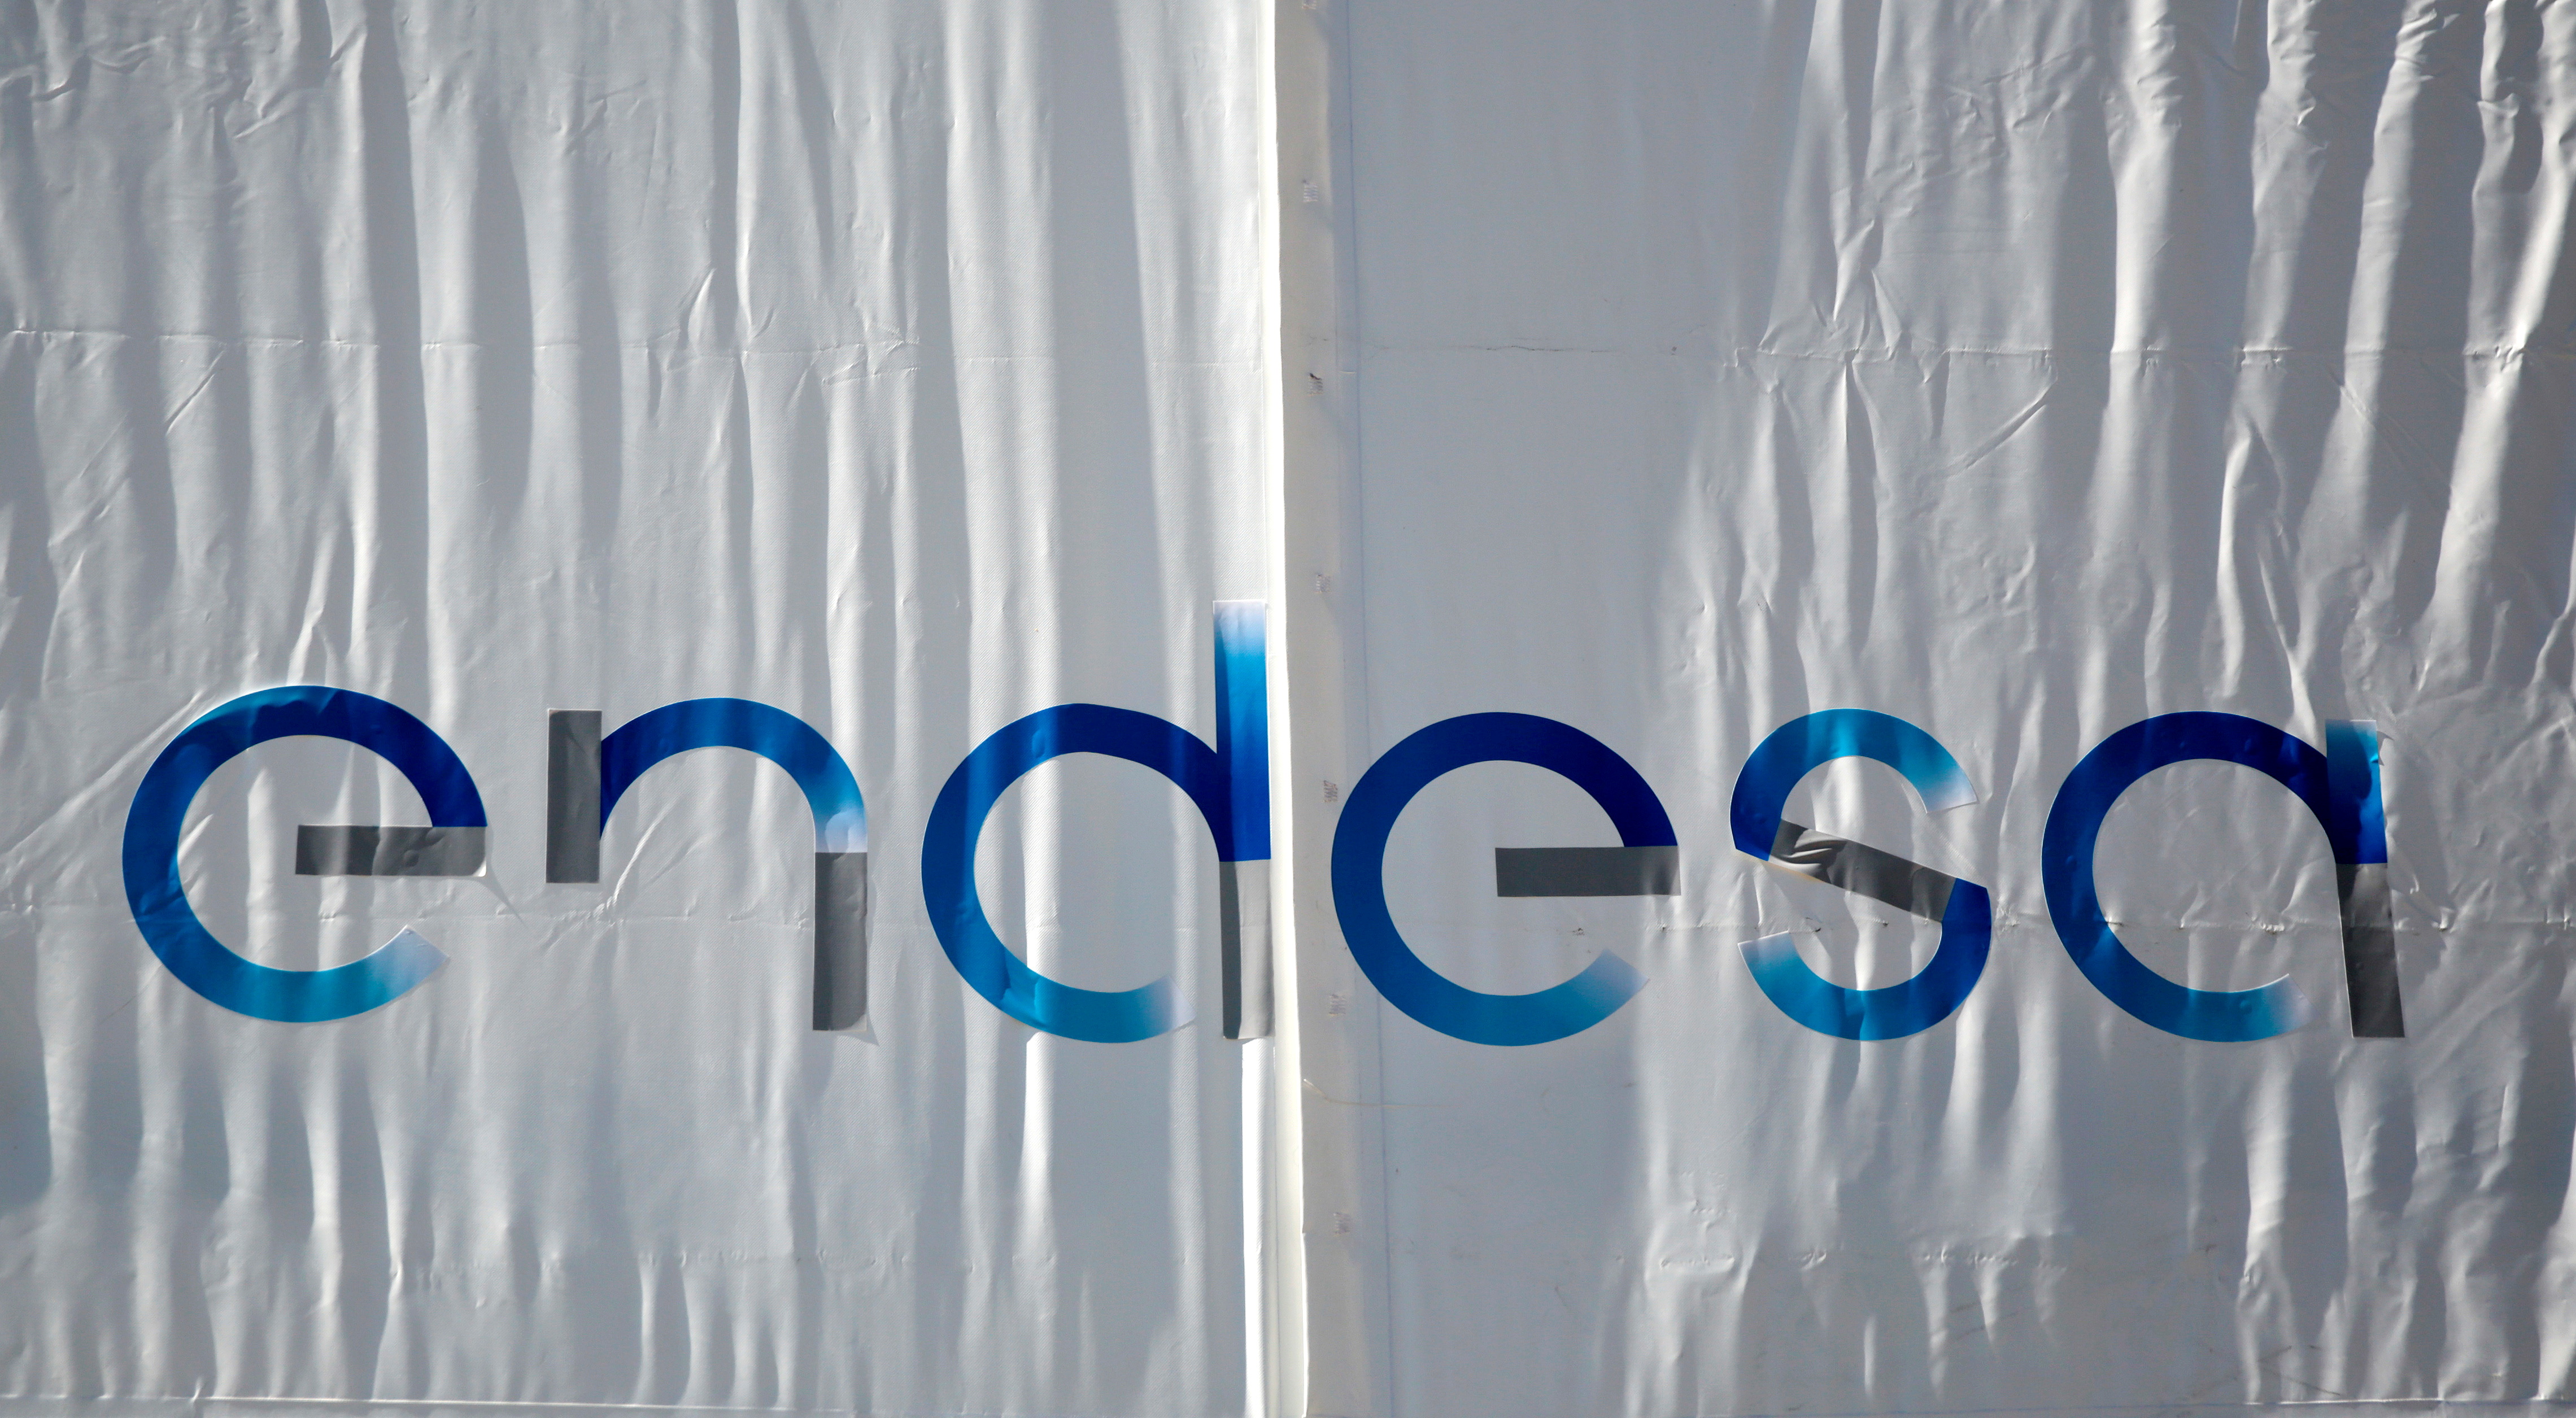 The logo of Spanish power company Endesa is seen on a banner at their headquarters in Madrid